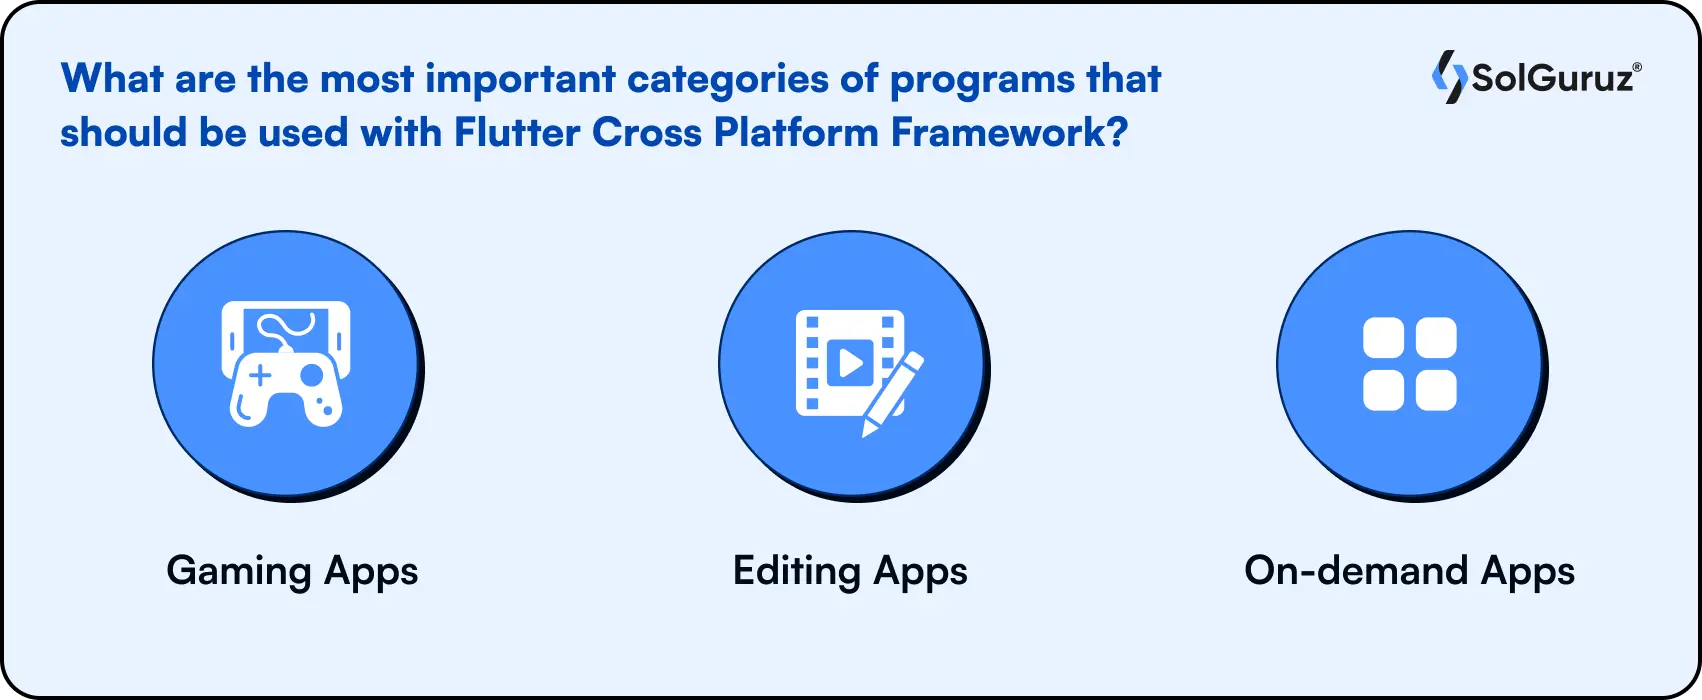 What are the most important categories of programs that should be used with Flutter Cross Platform Framework